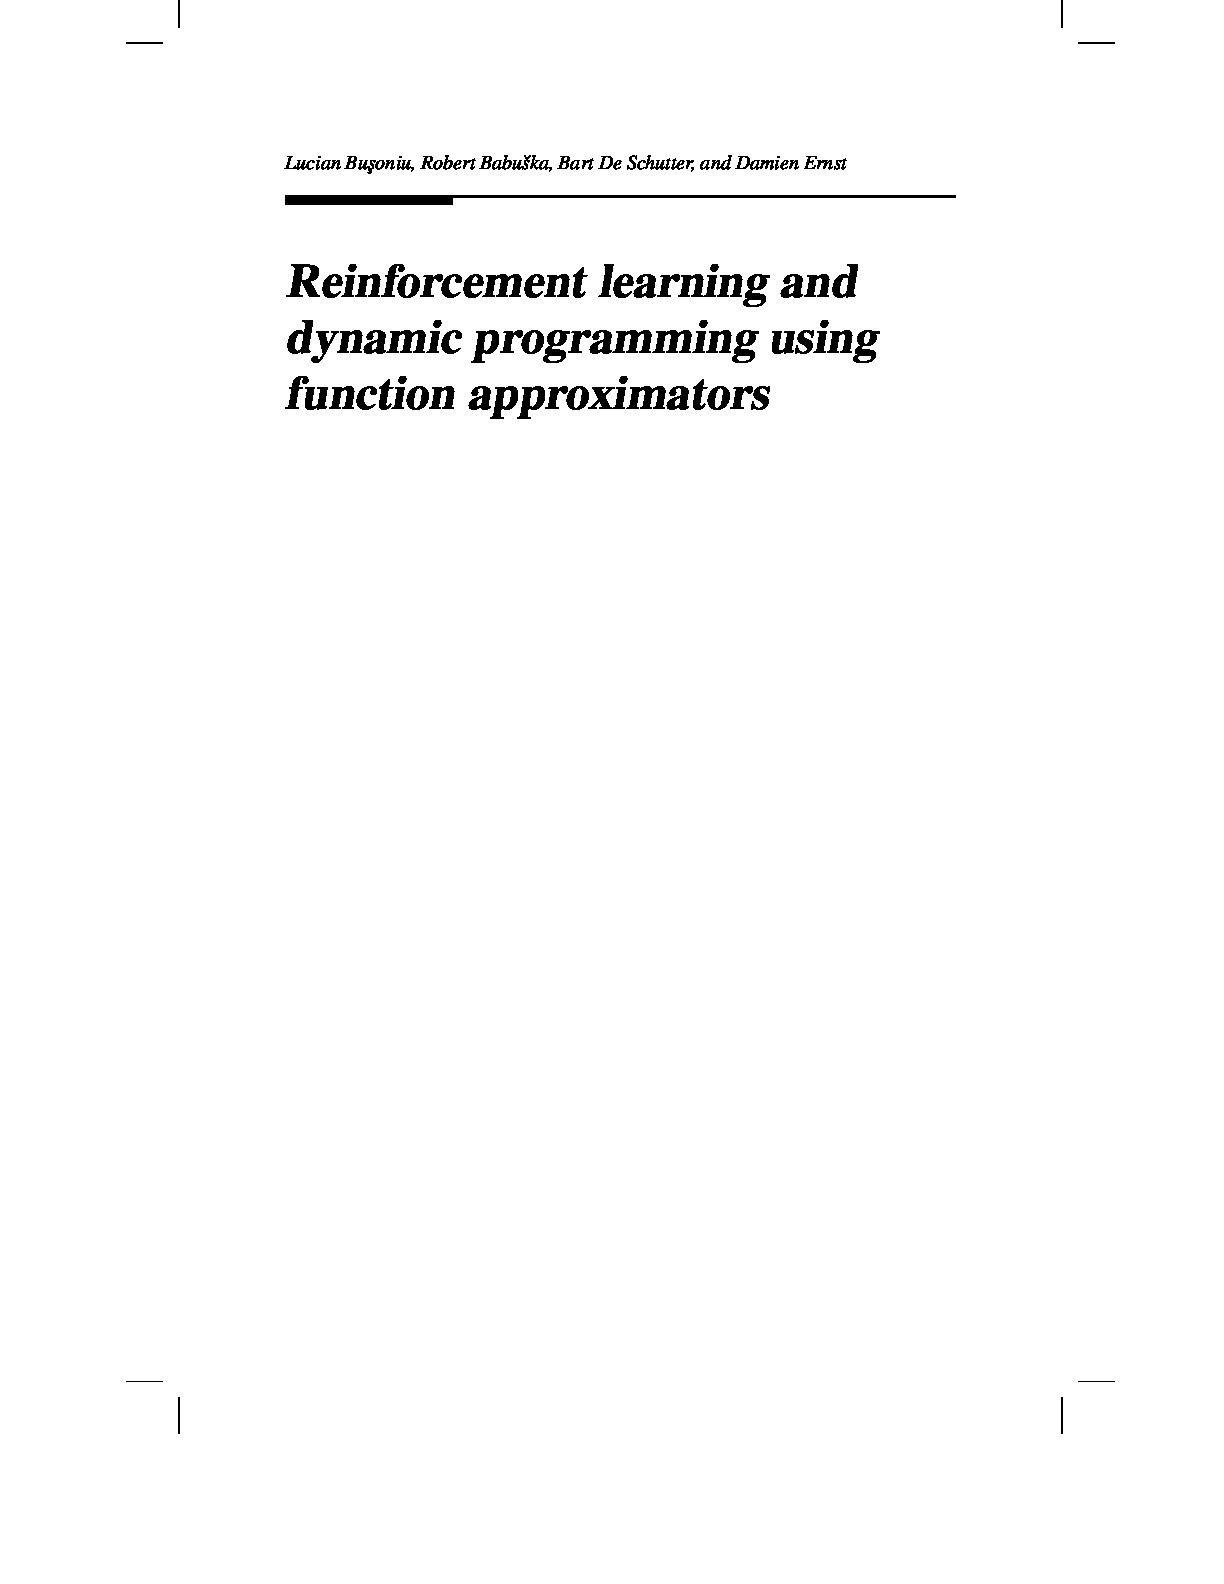 Reinforcement learning and dynamic programming using function approximators